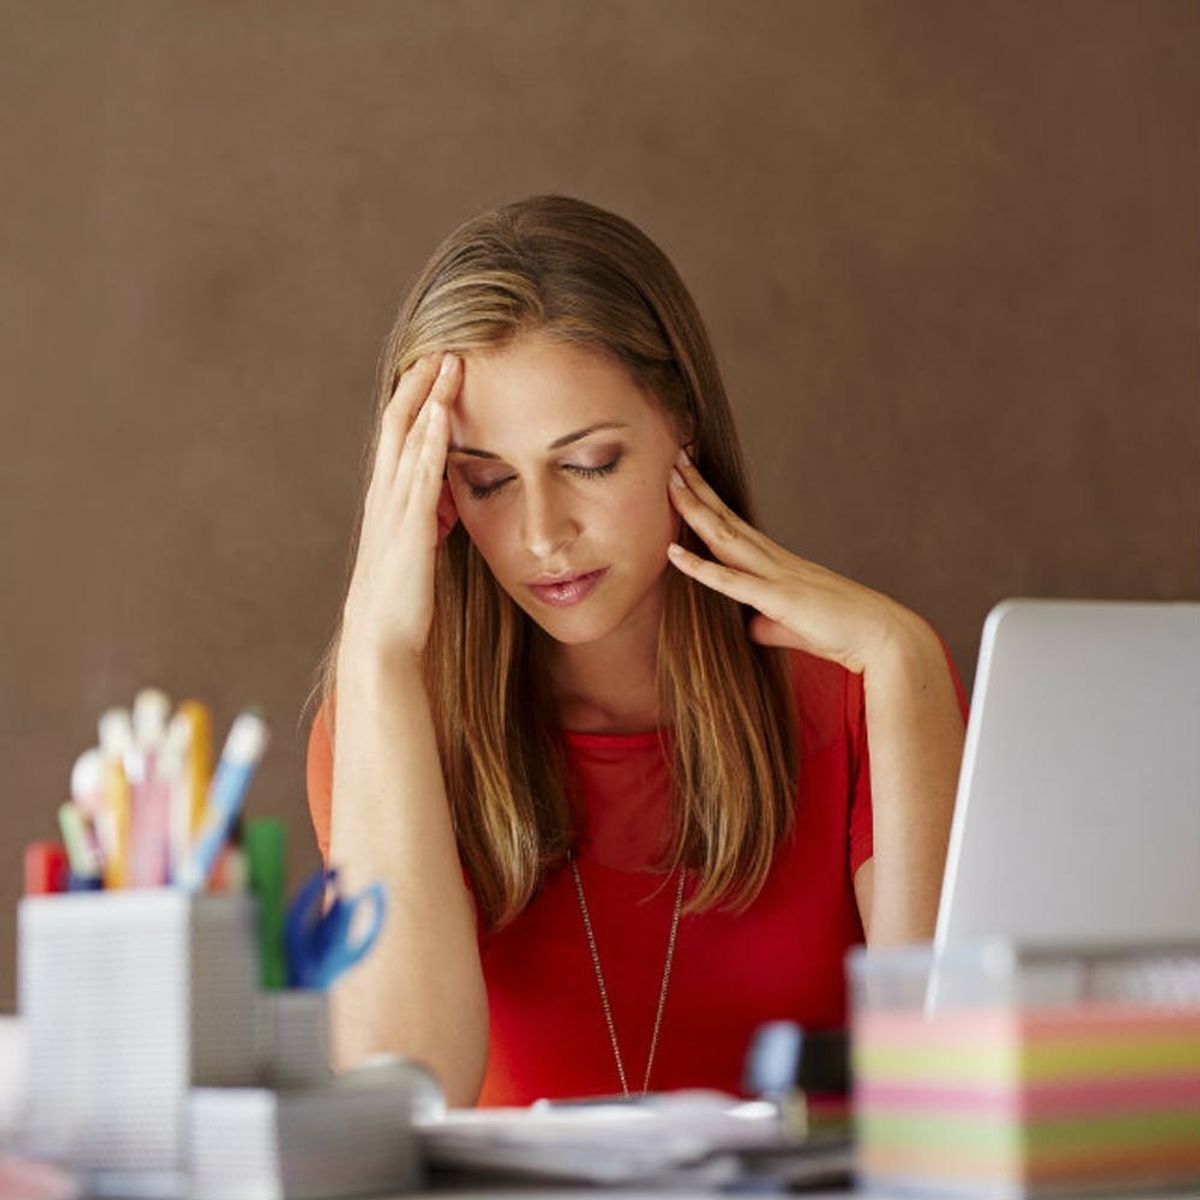 4 Tips for Leaving Work Stress at the Office